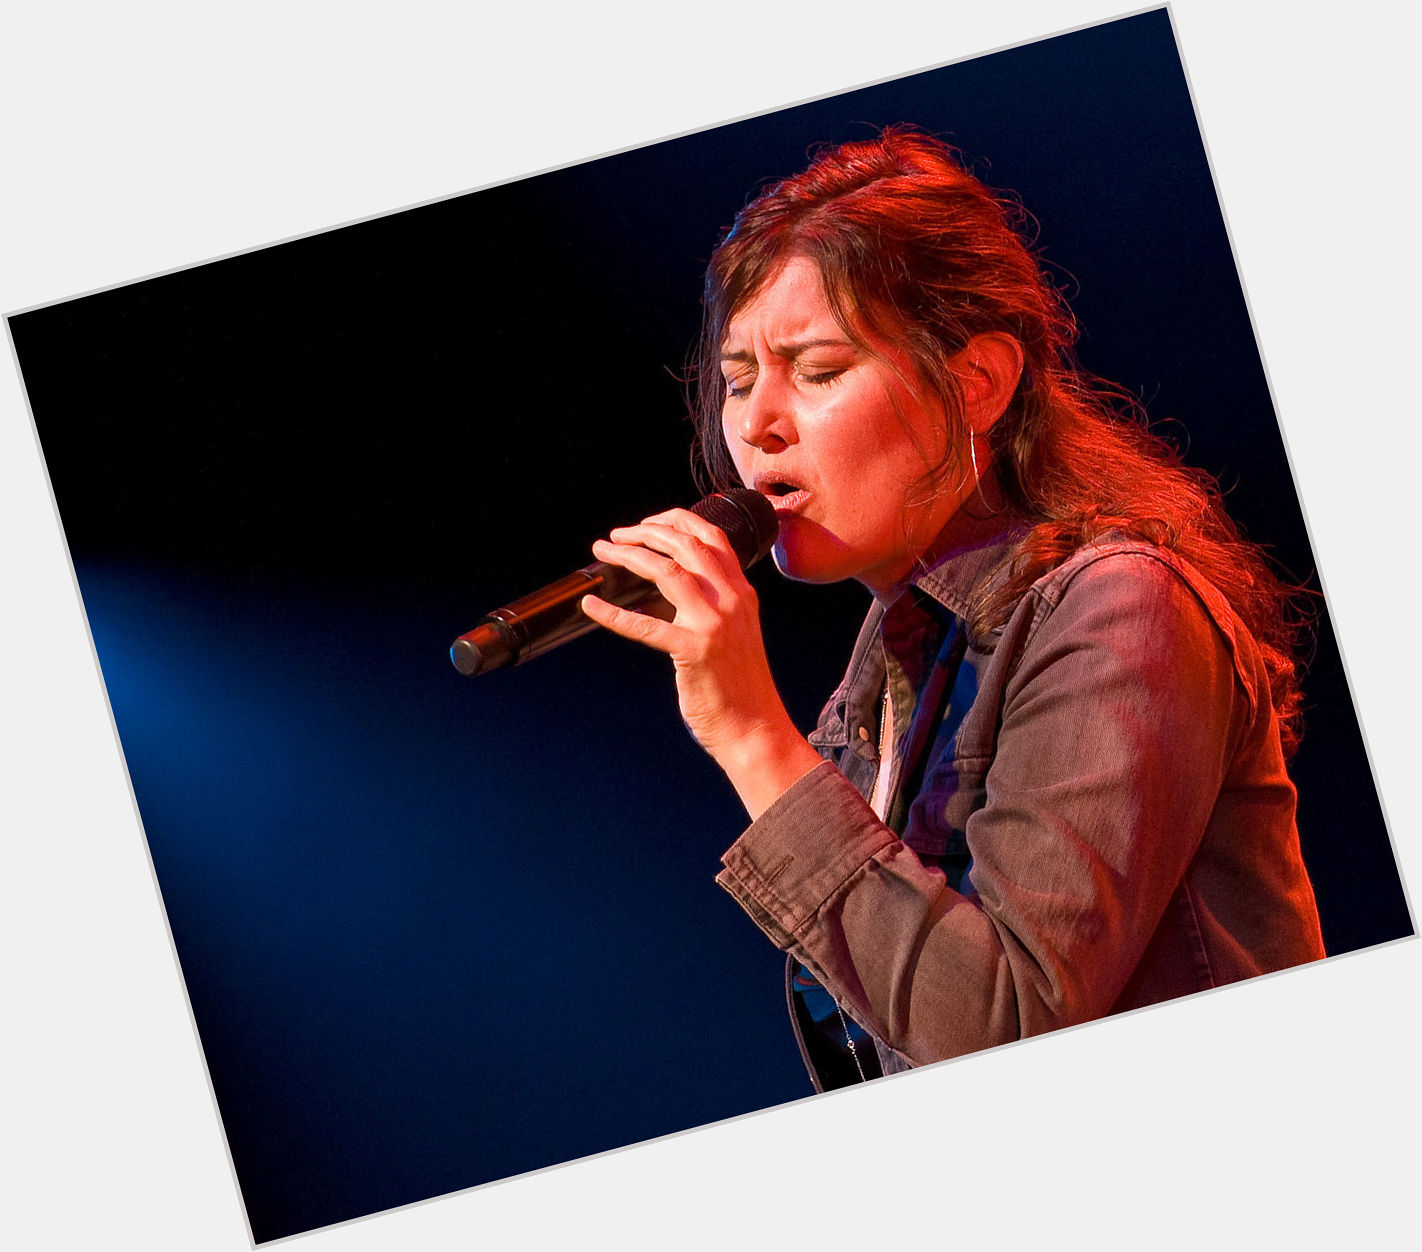 Please join me here at in wishing the one and only Paula Cole a very Happy Birthday today  